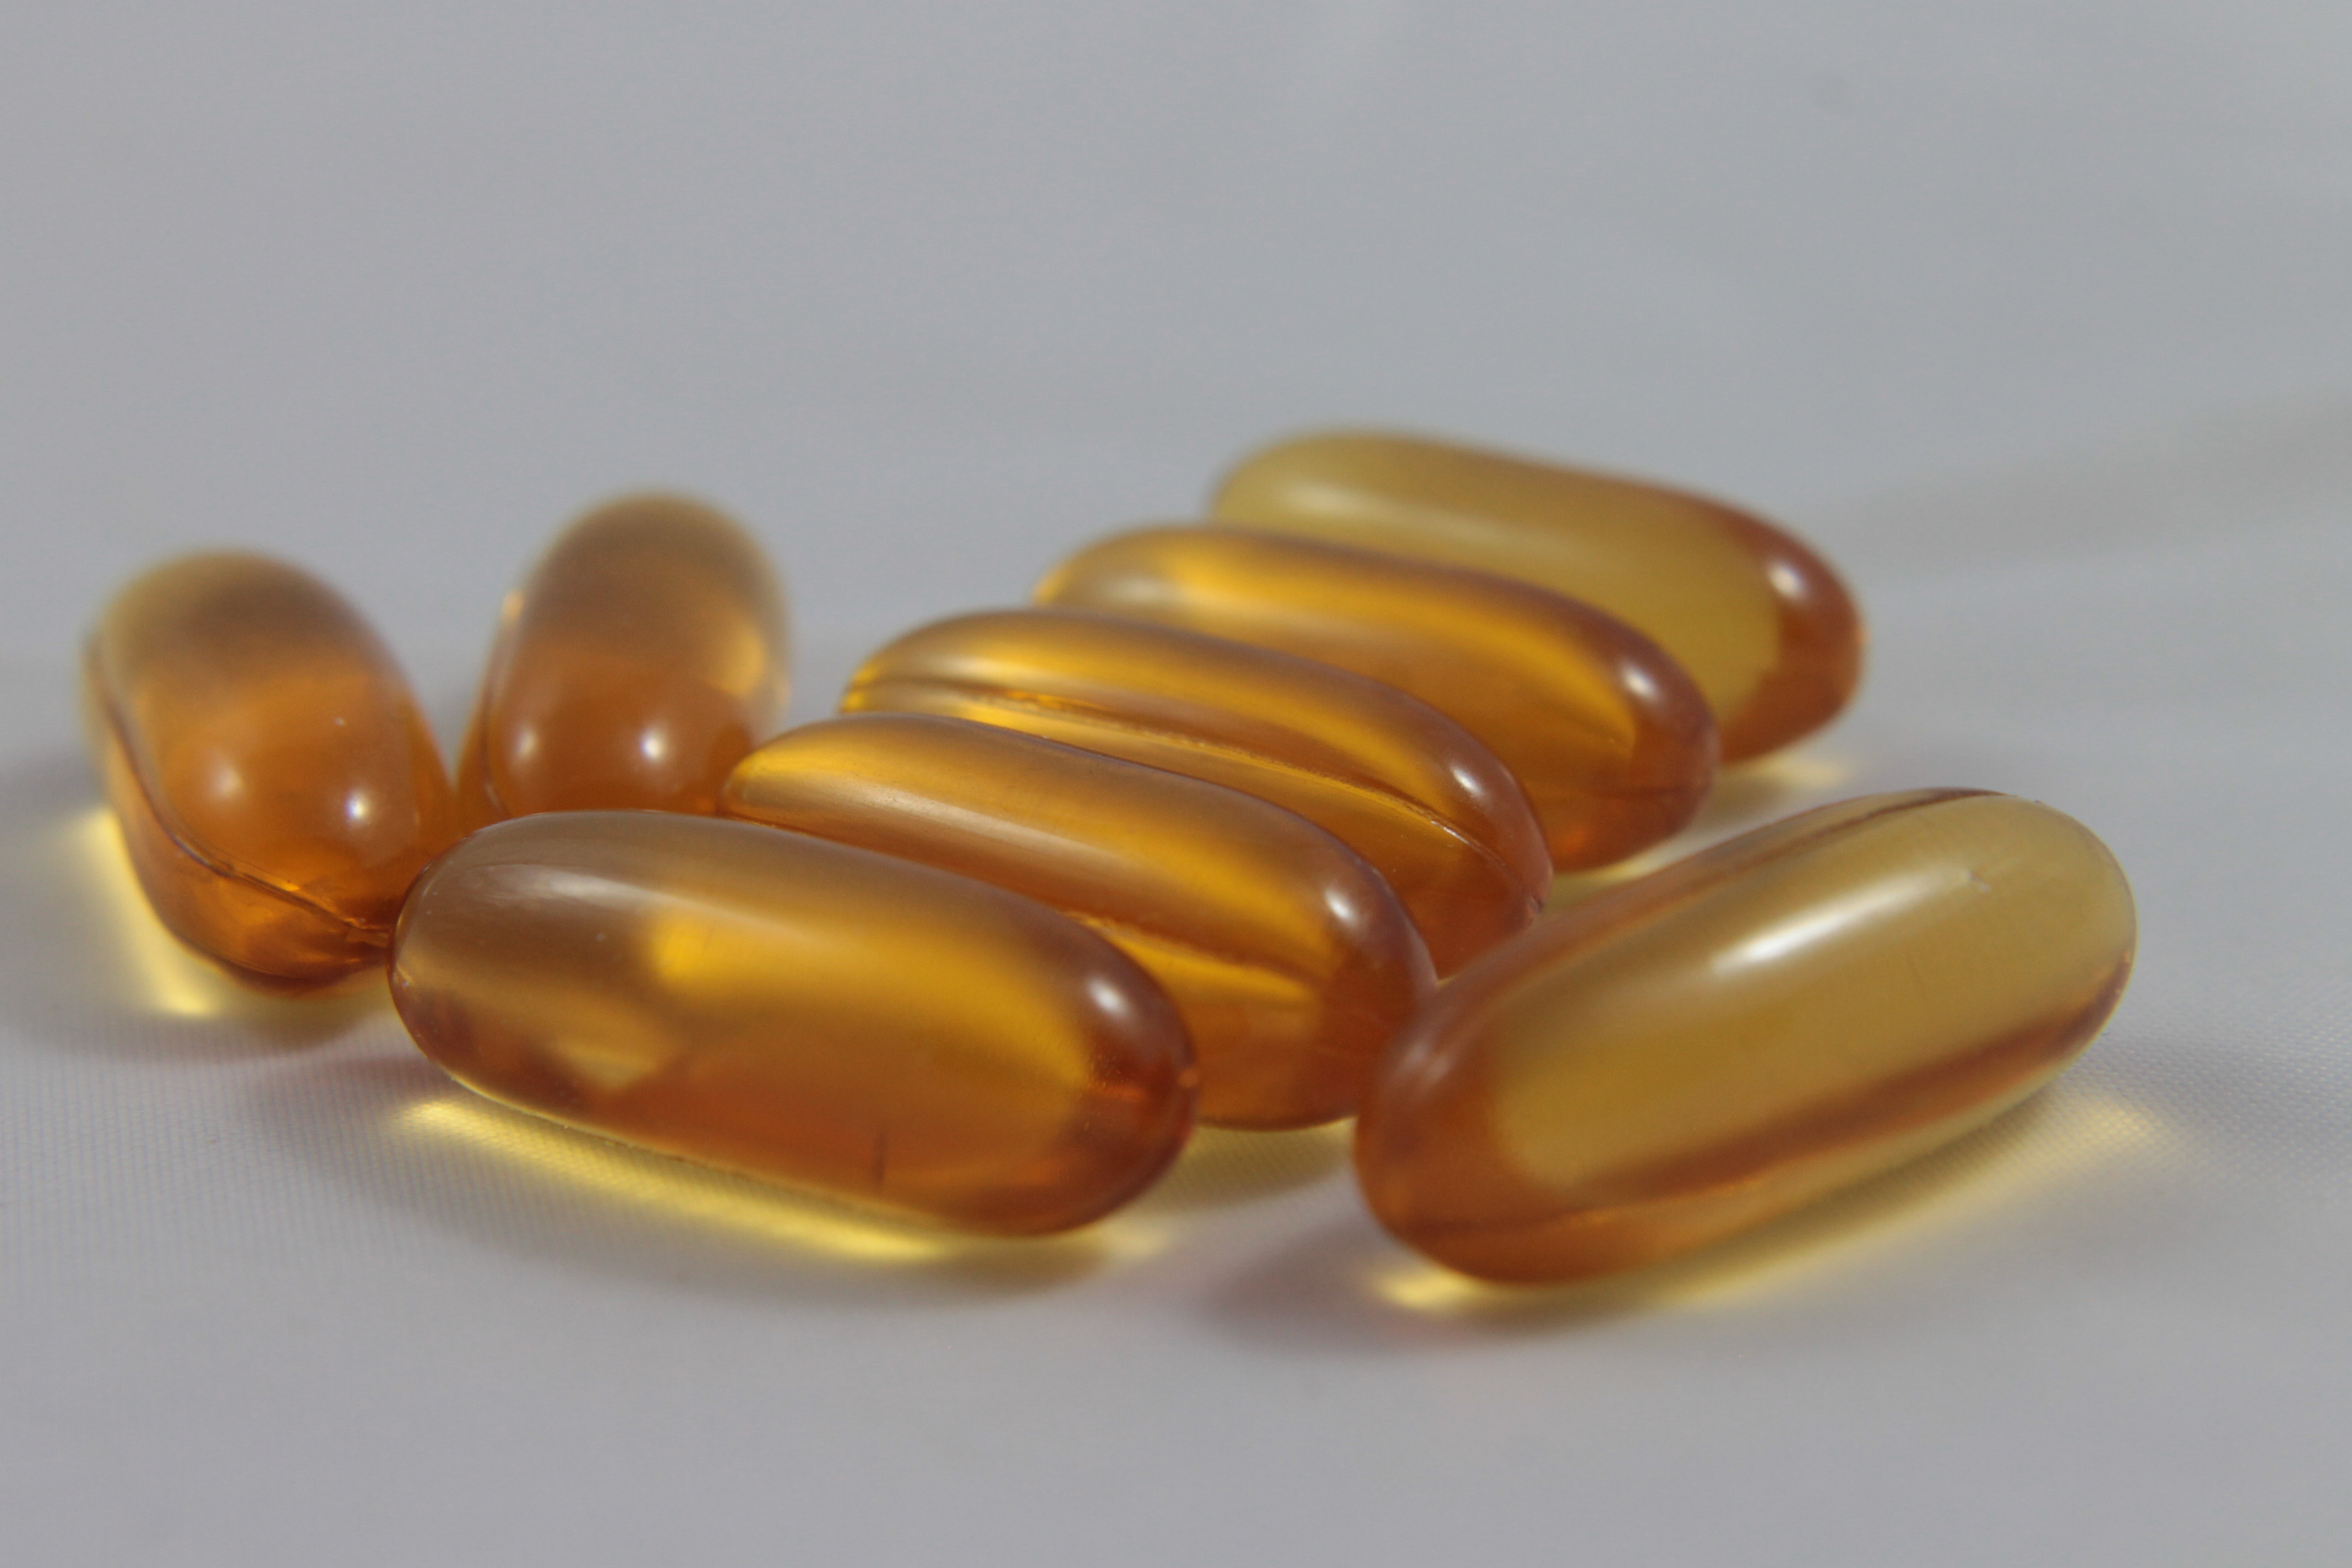 Close-Up Of Omega-3 Capsules On Table